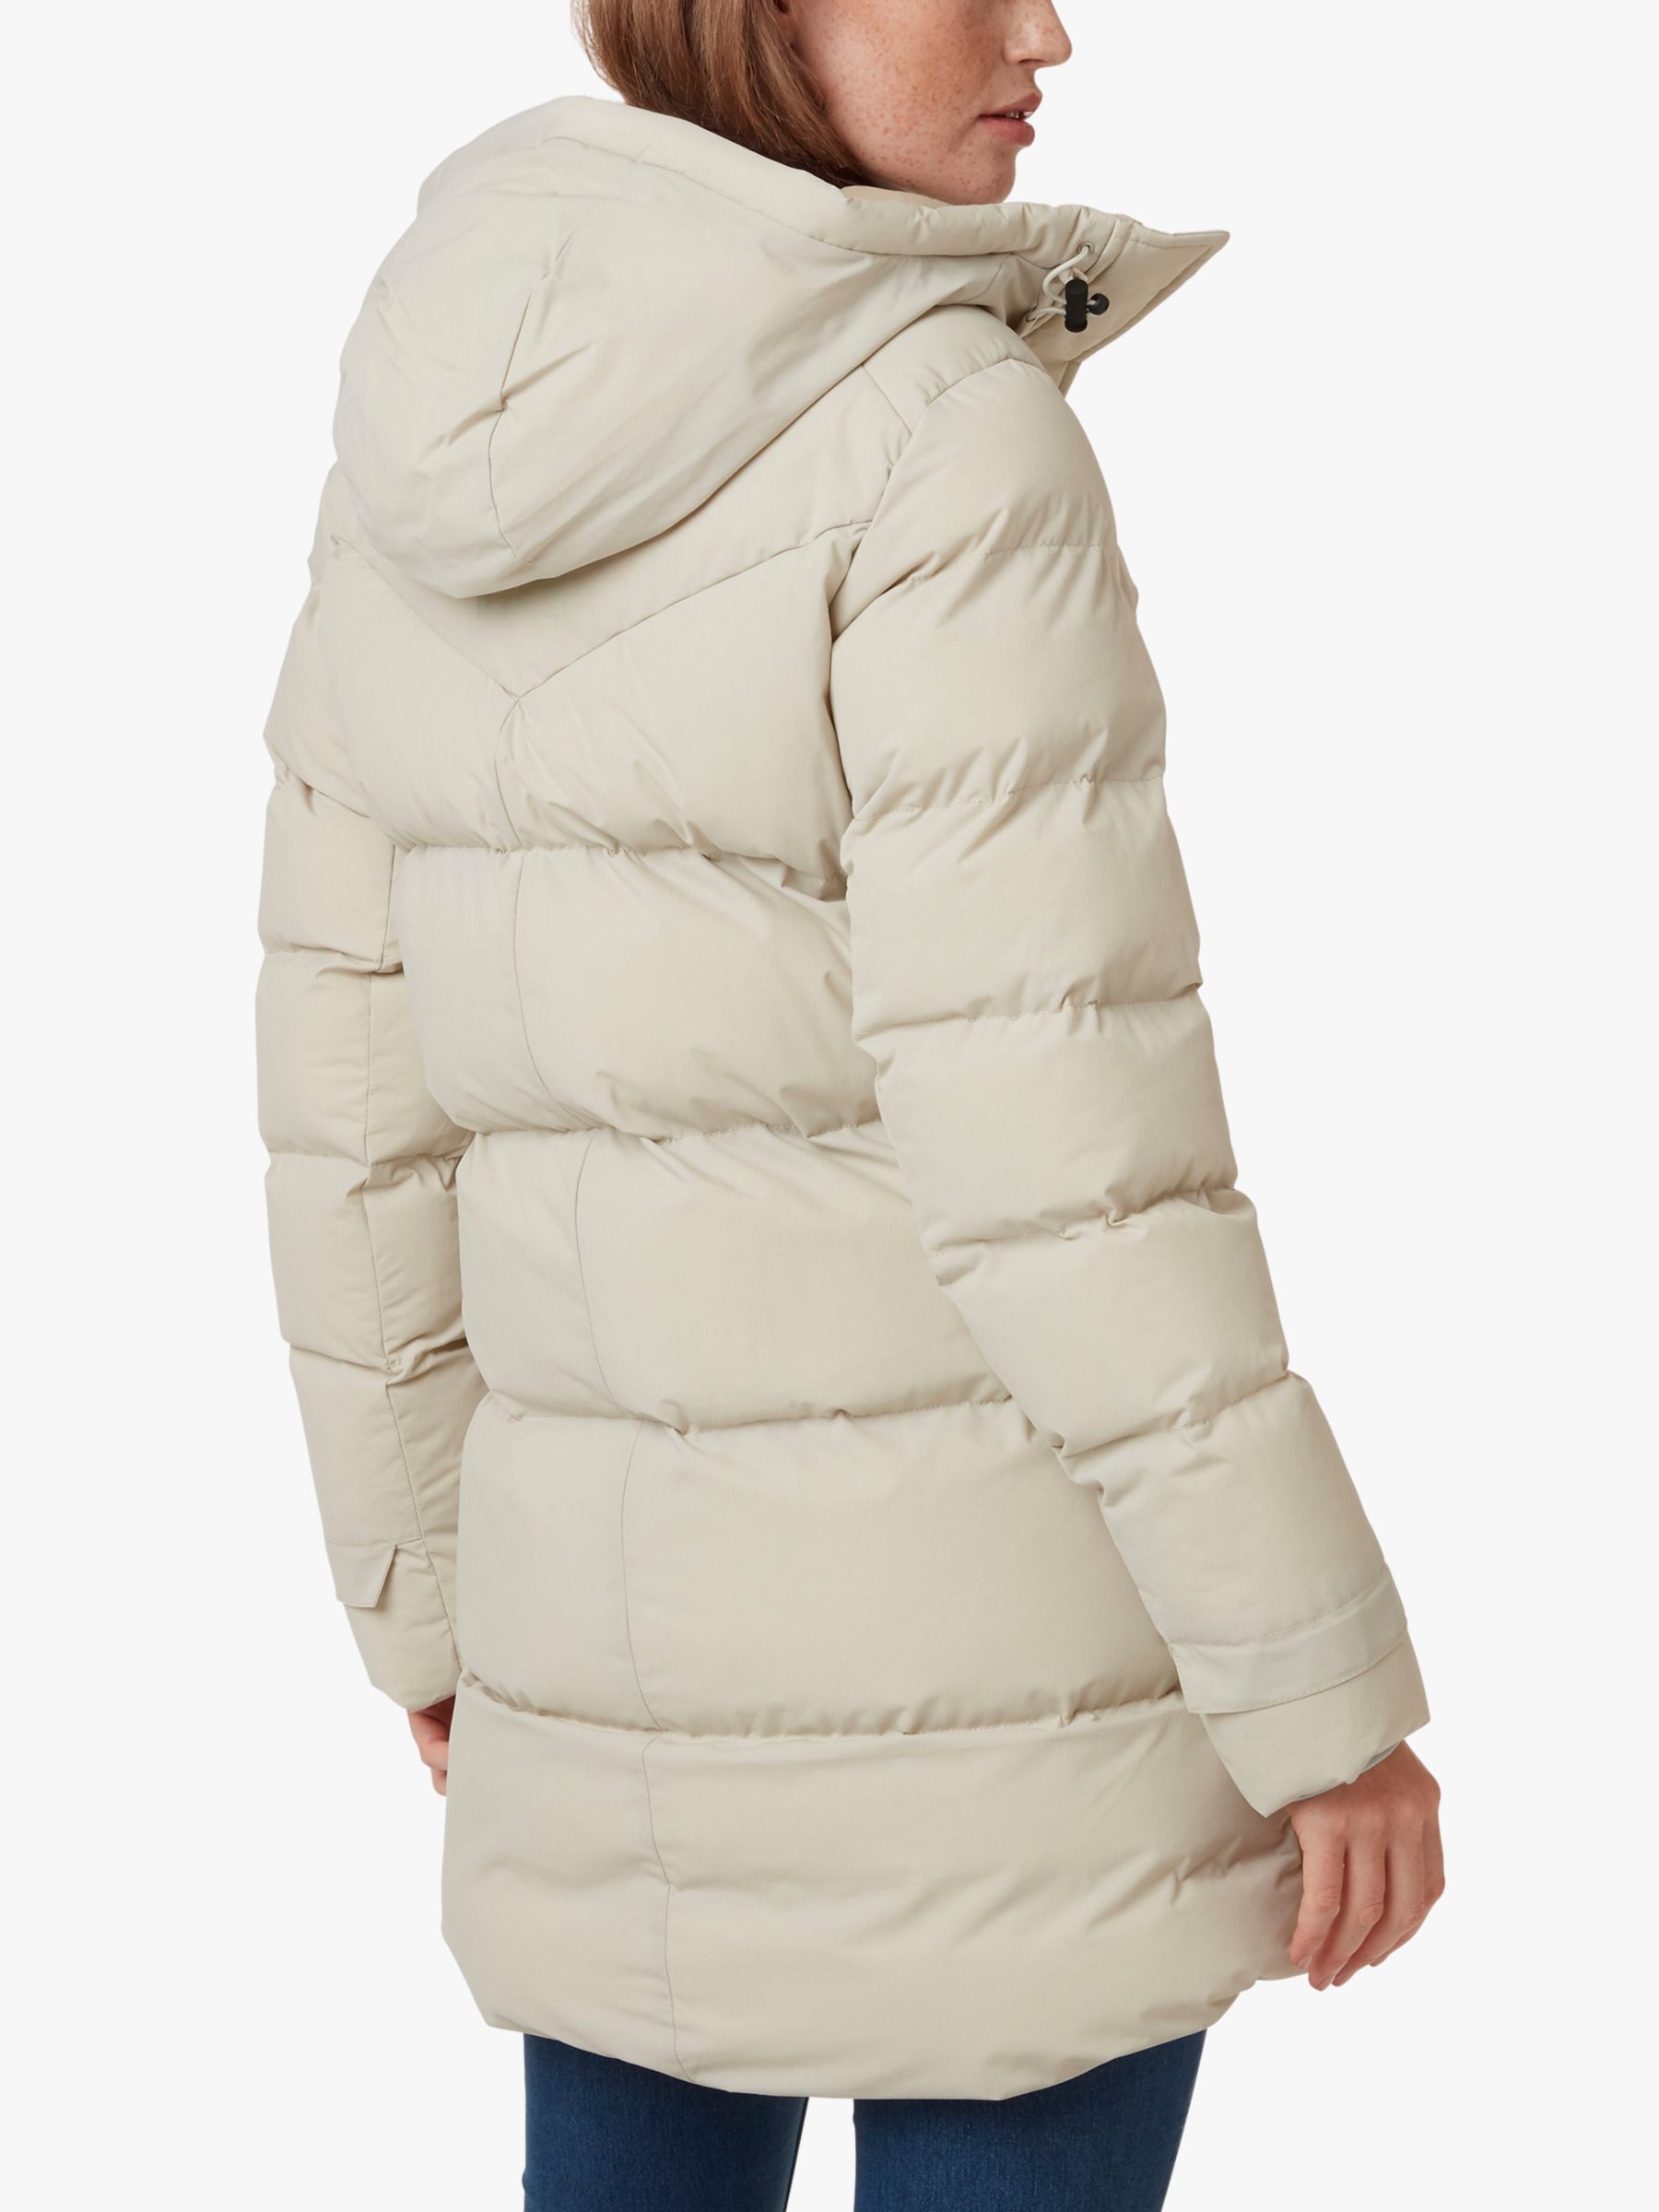 Helly Hansen Adore Puffy Women's Insulated Parka Jacket, Pelican at ...